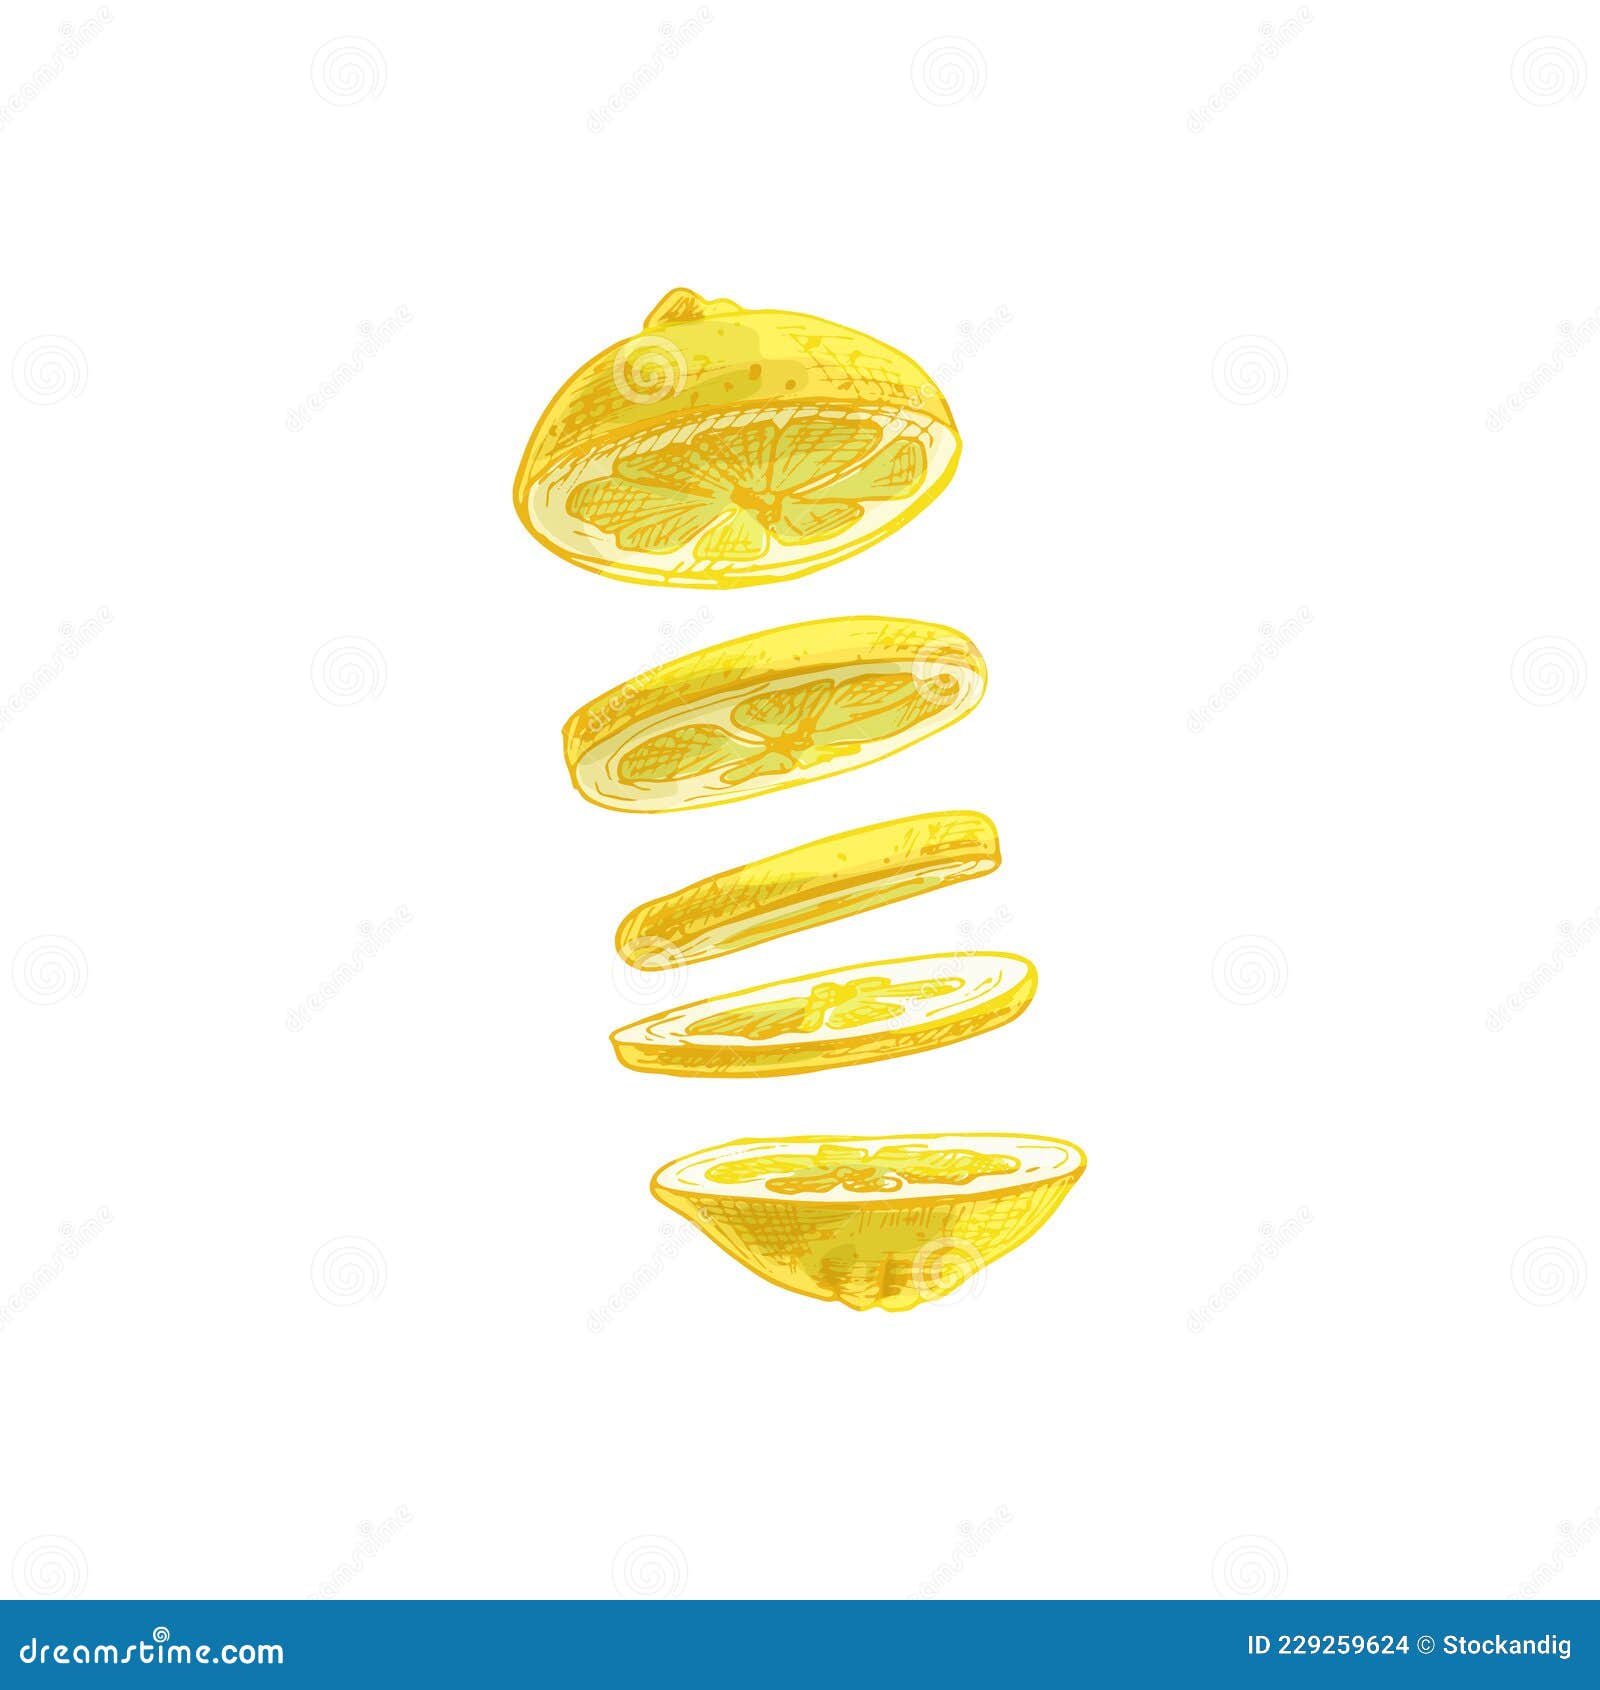 Flying Pieces of Fresh Lemon. Vector Vintage Hatching Color ...